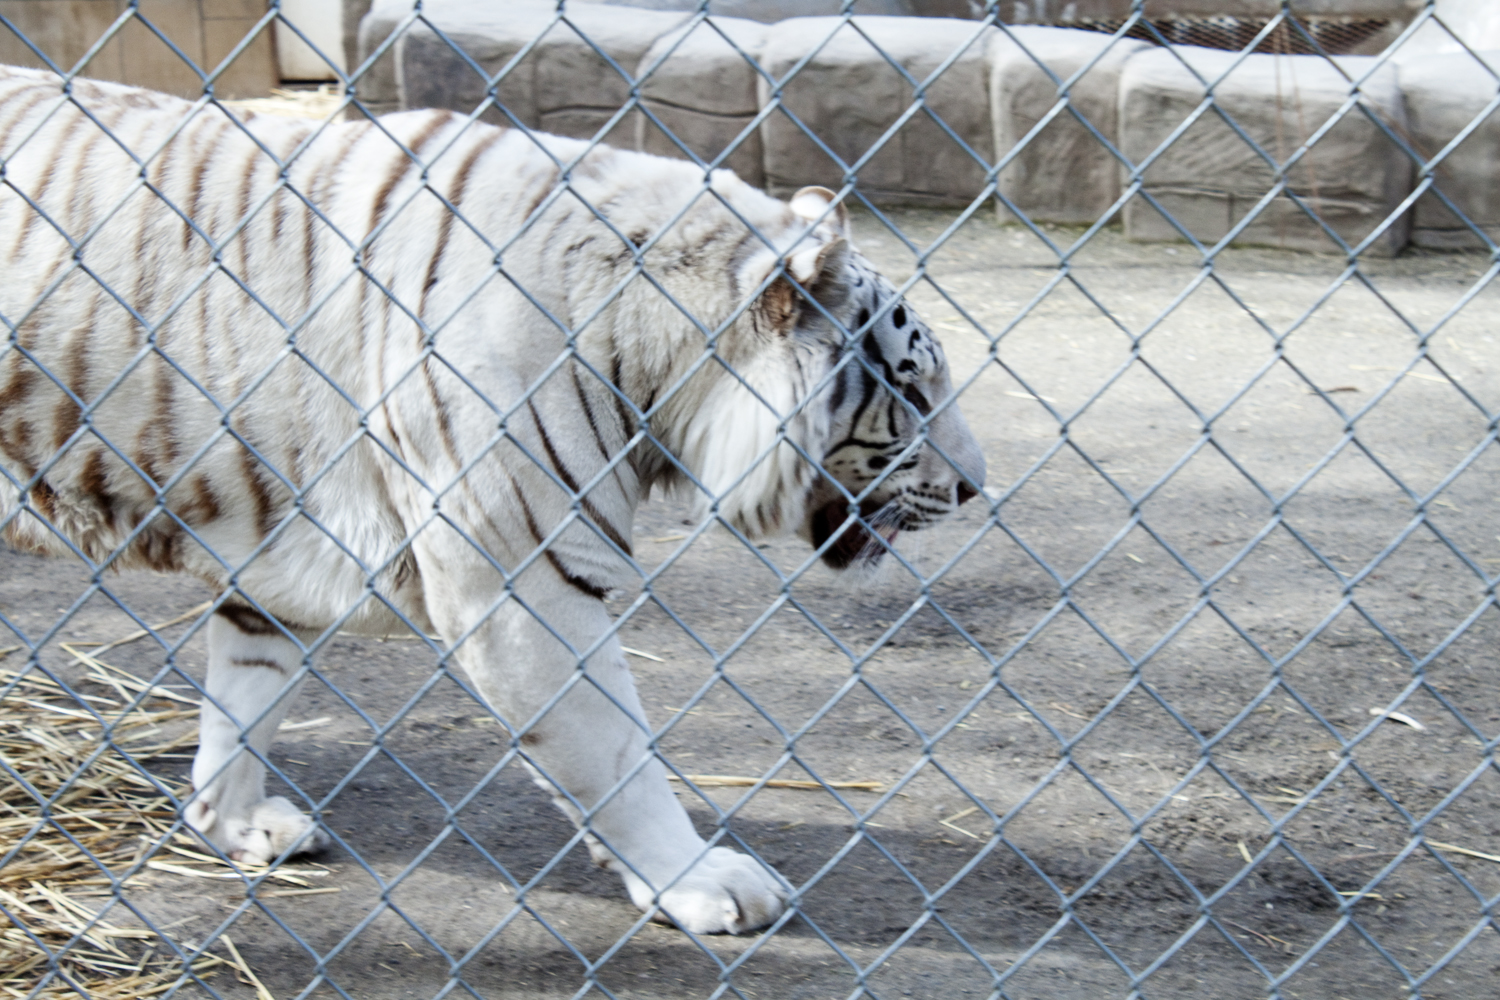 White tigers are my favorite.